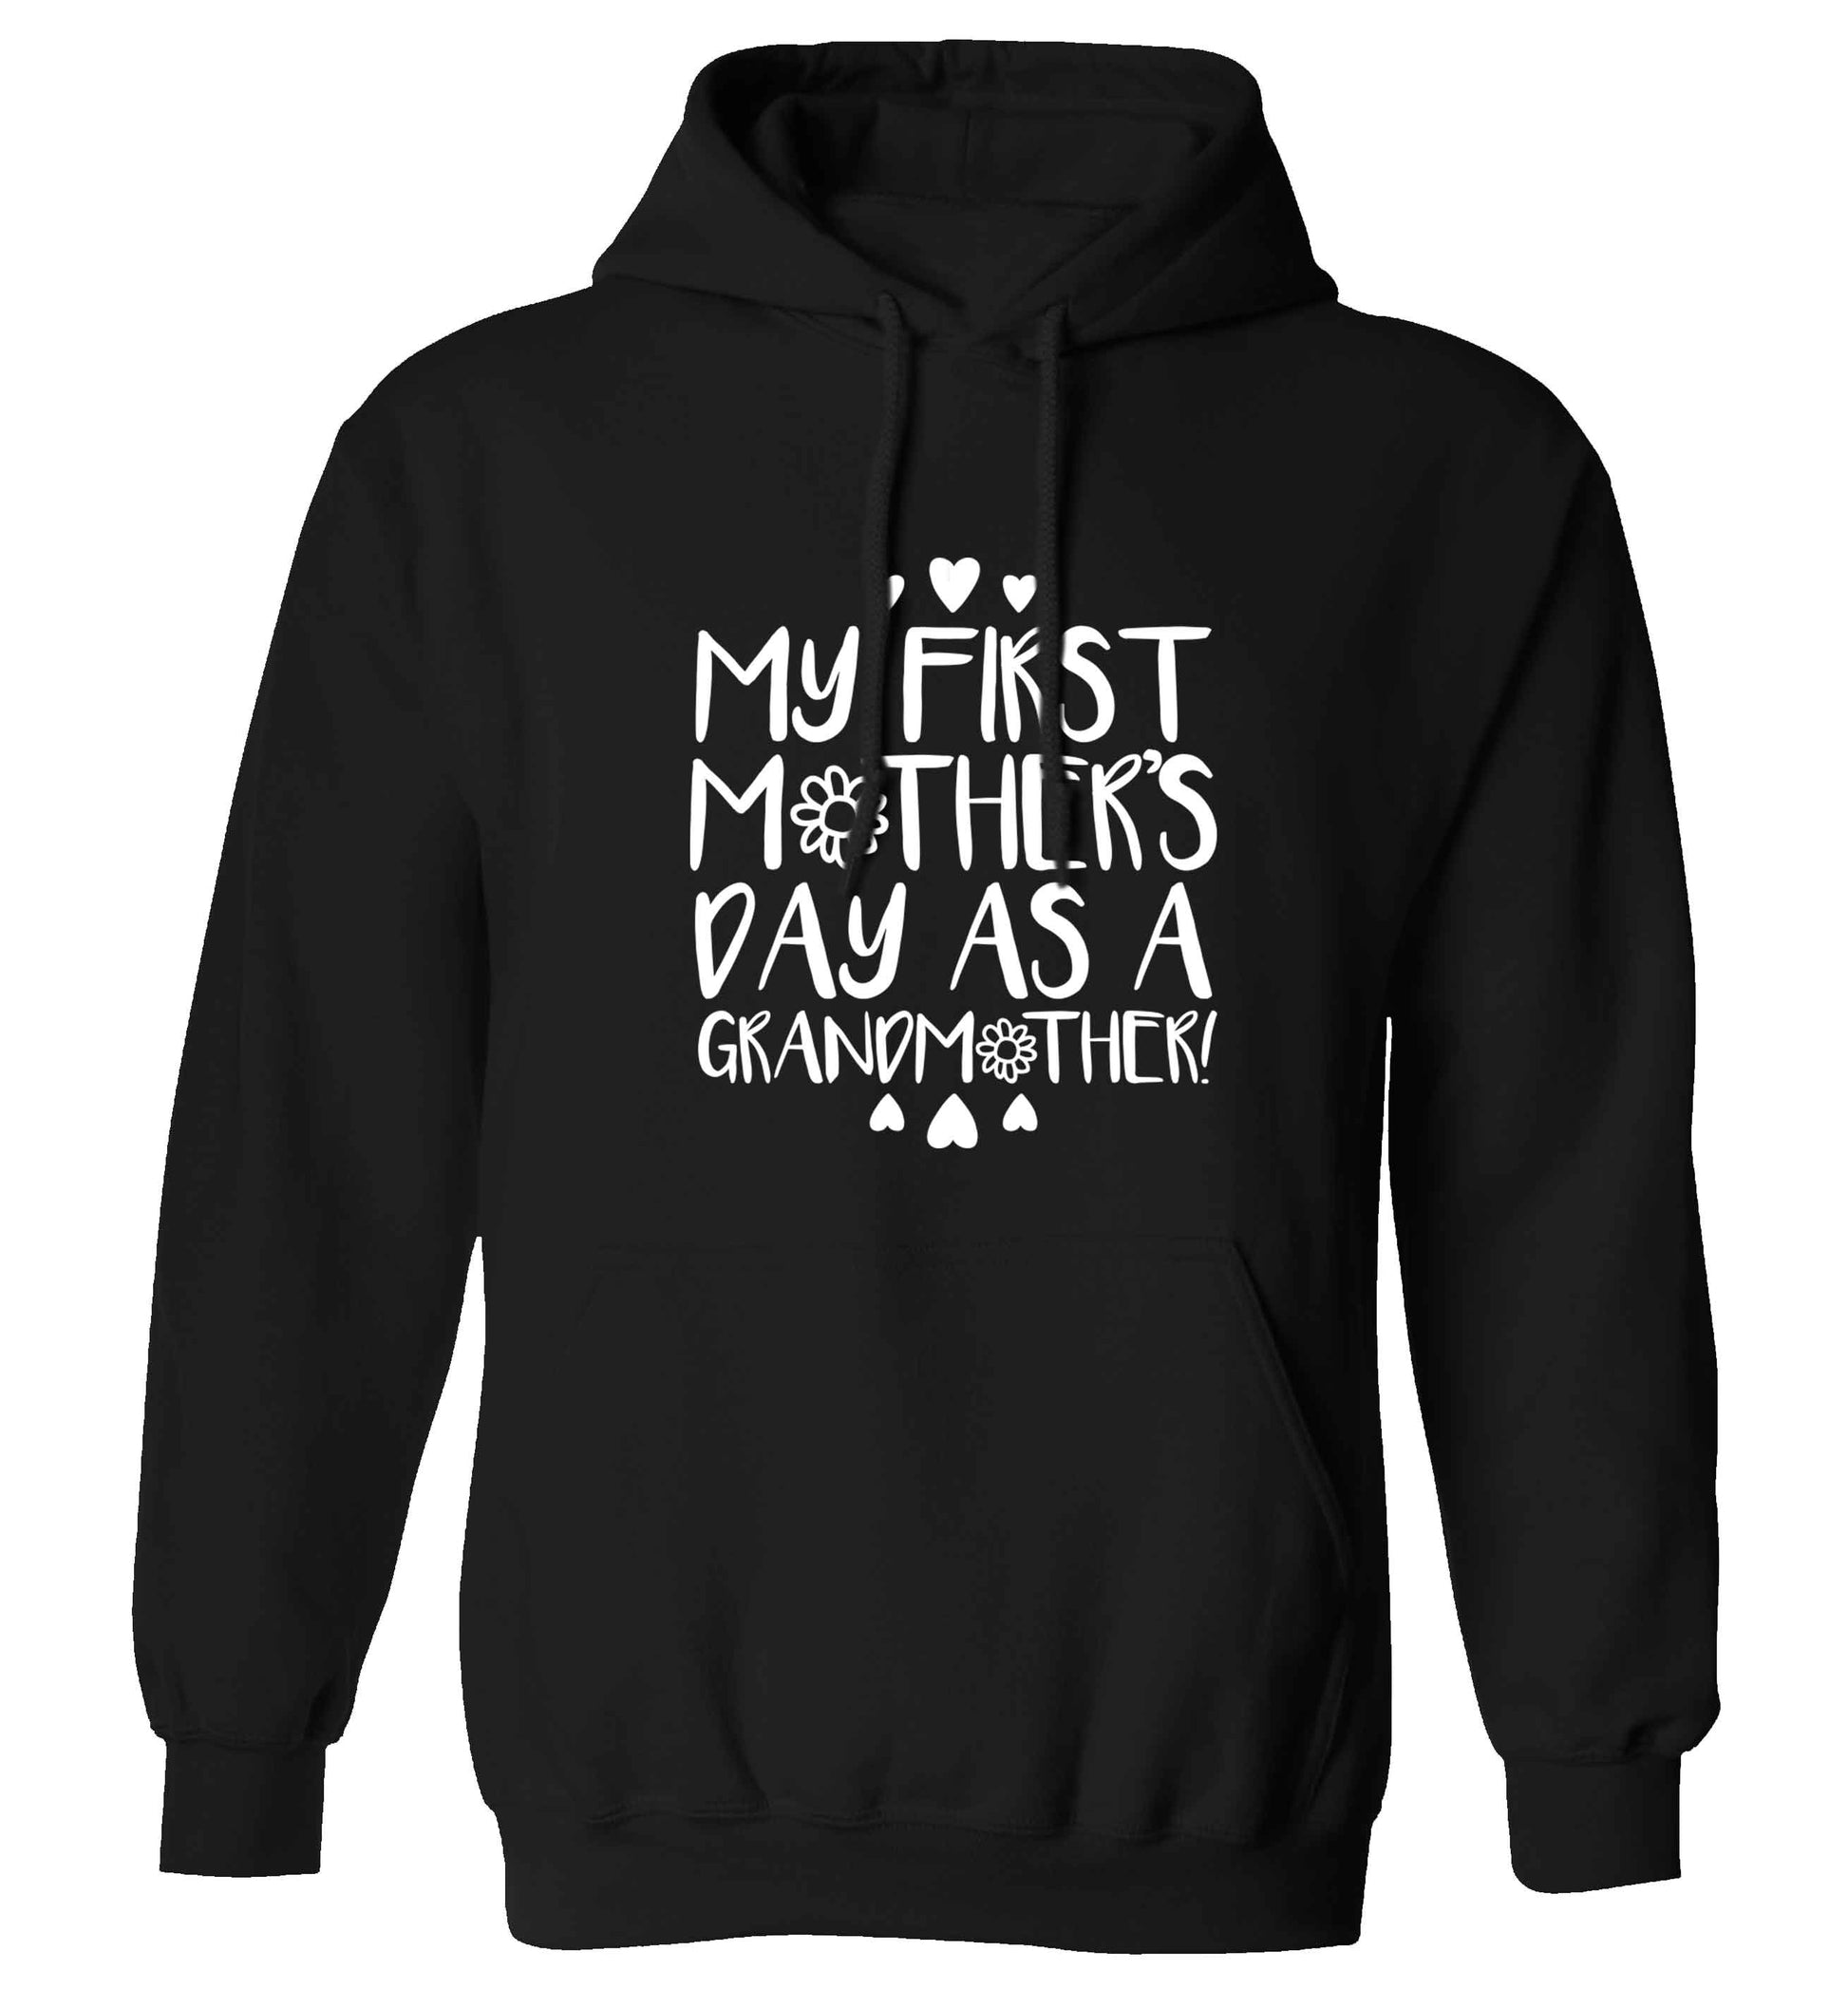 It's my first mother's day as a grandmother adults unisex black hoodie 2XL